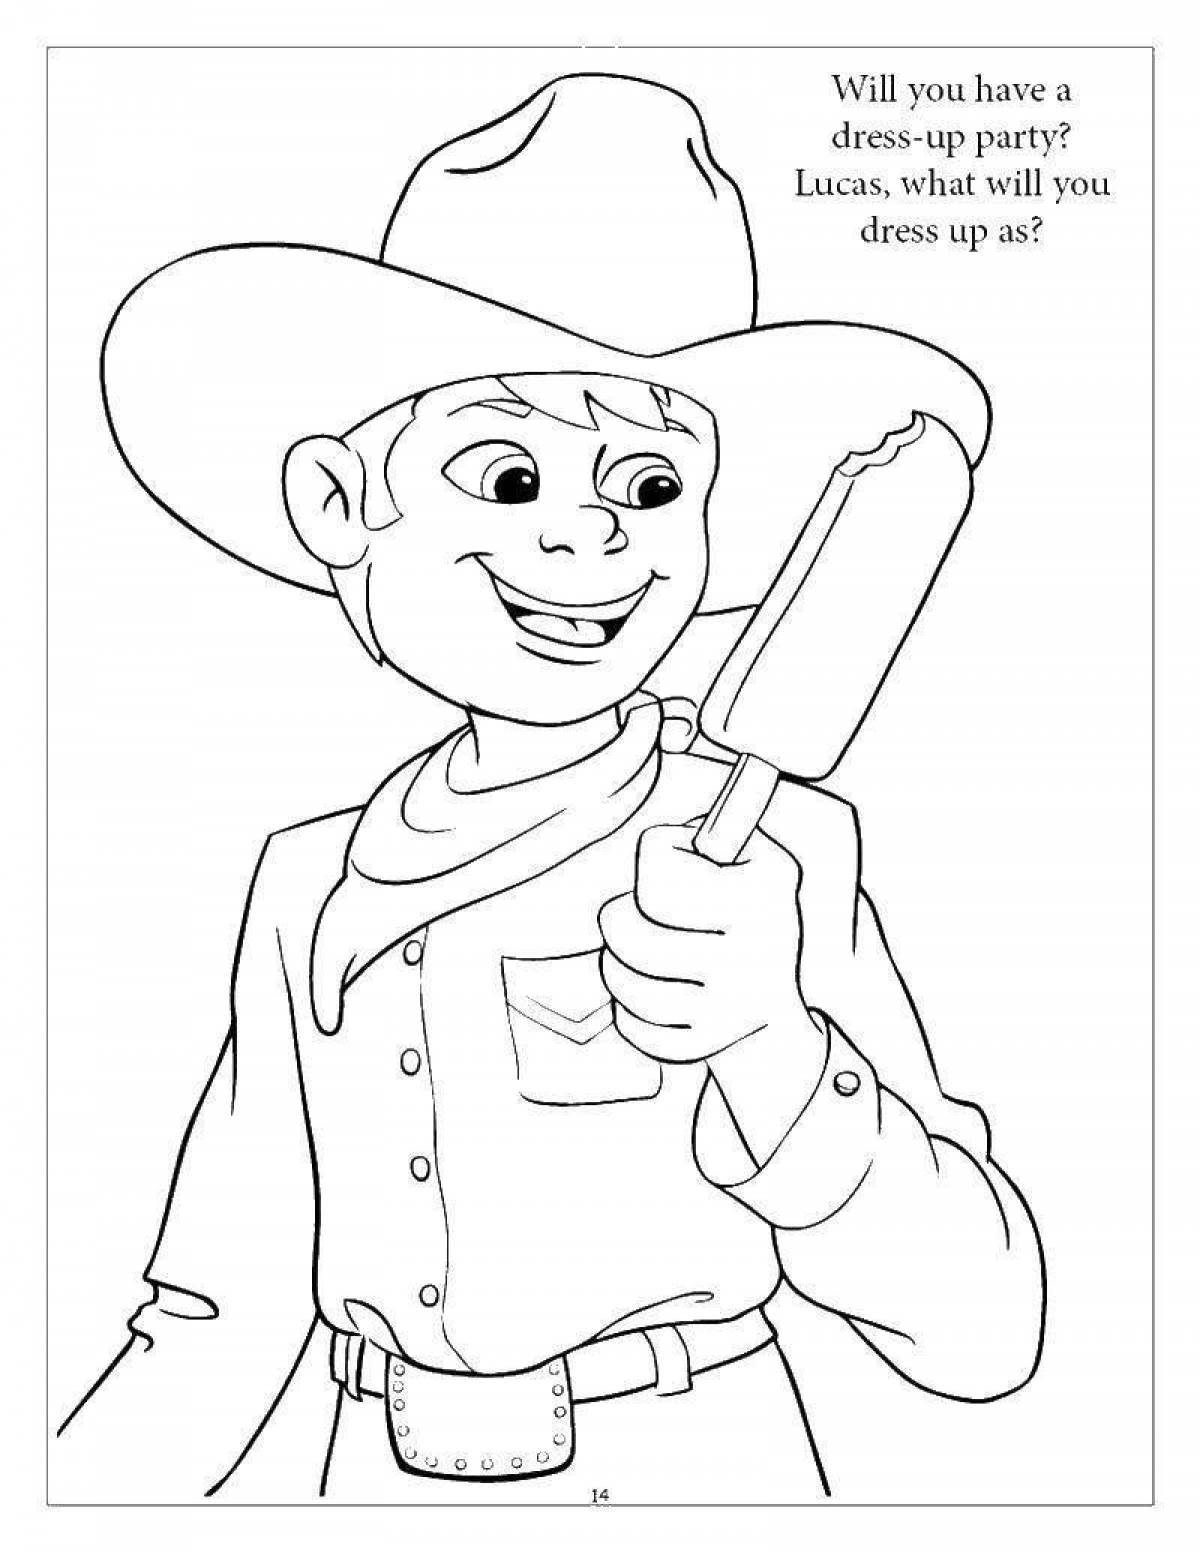 Willie Wonka funny coloring book